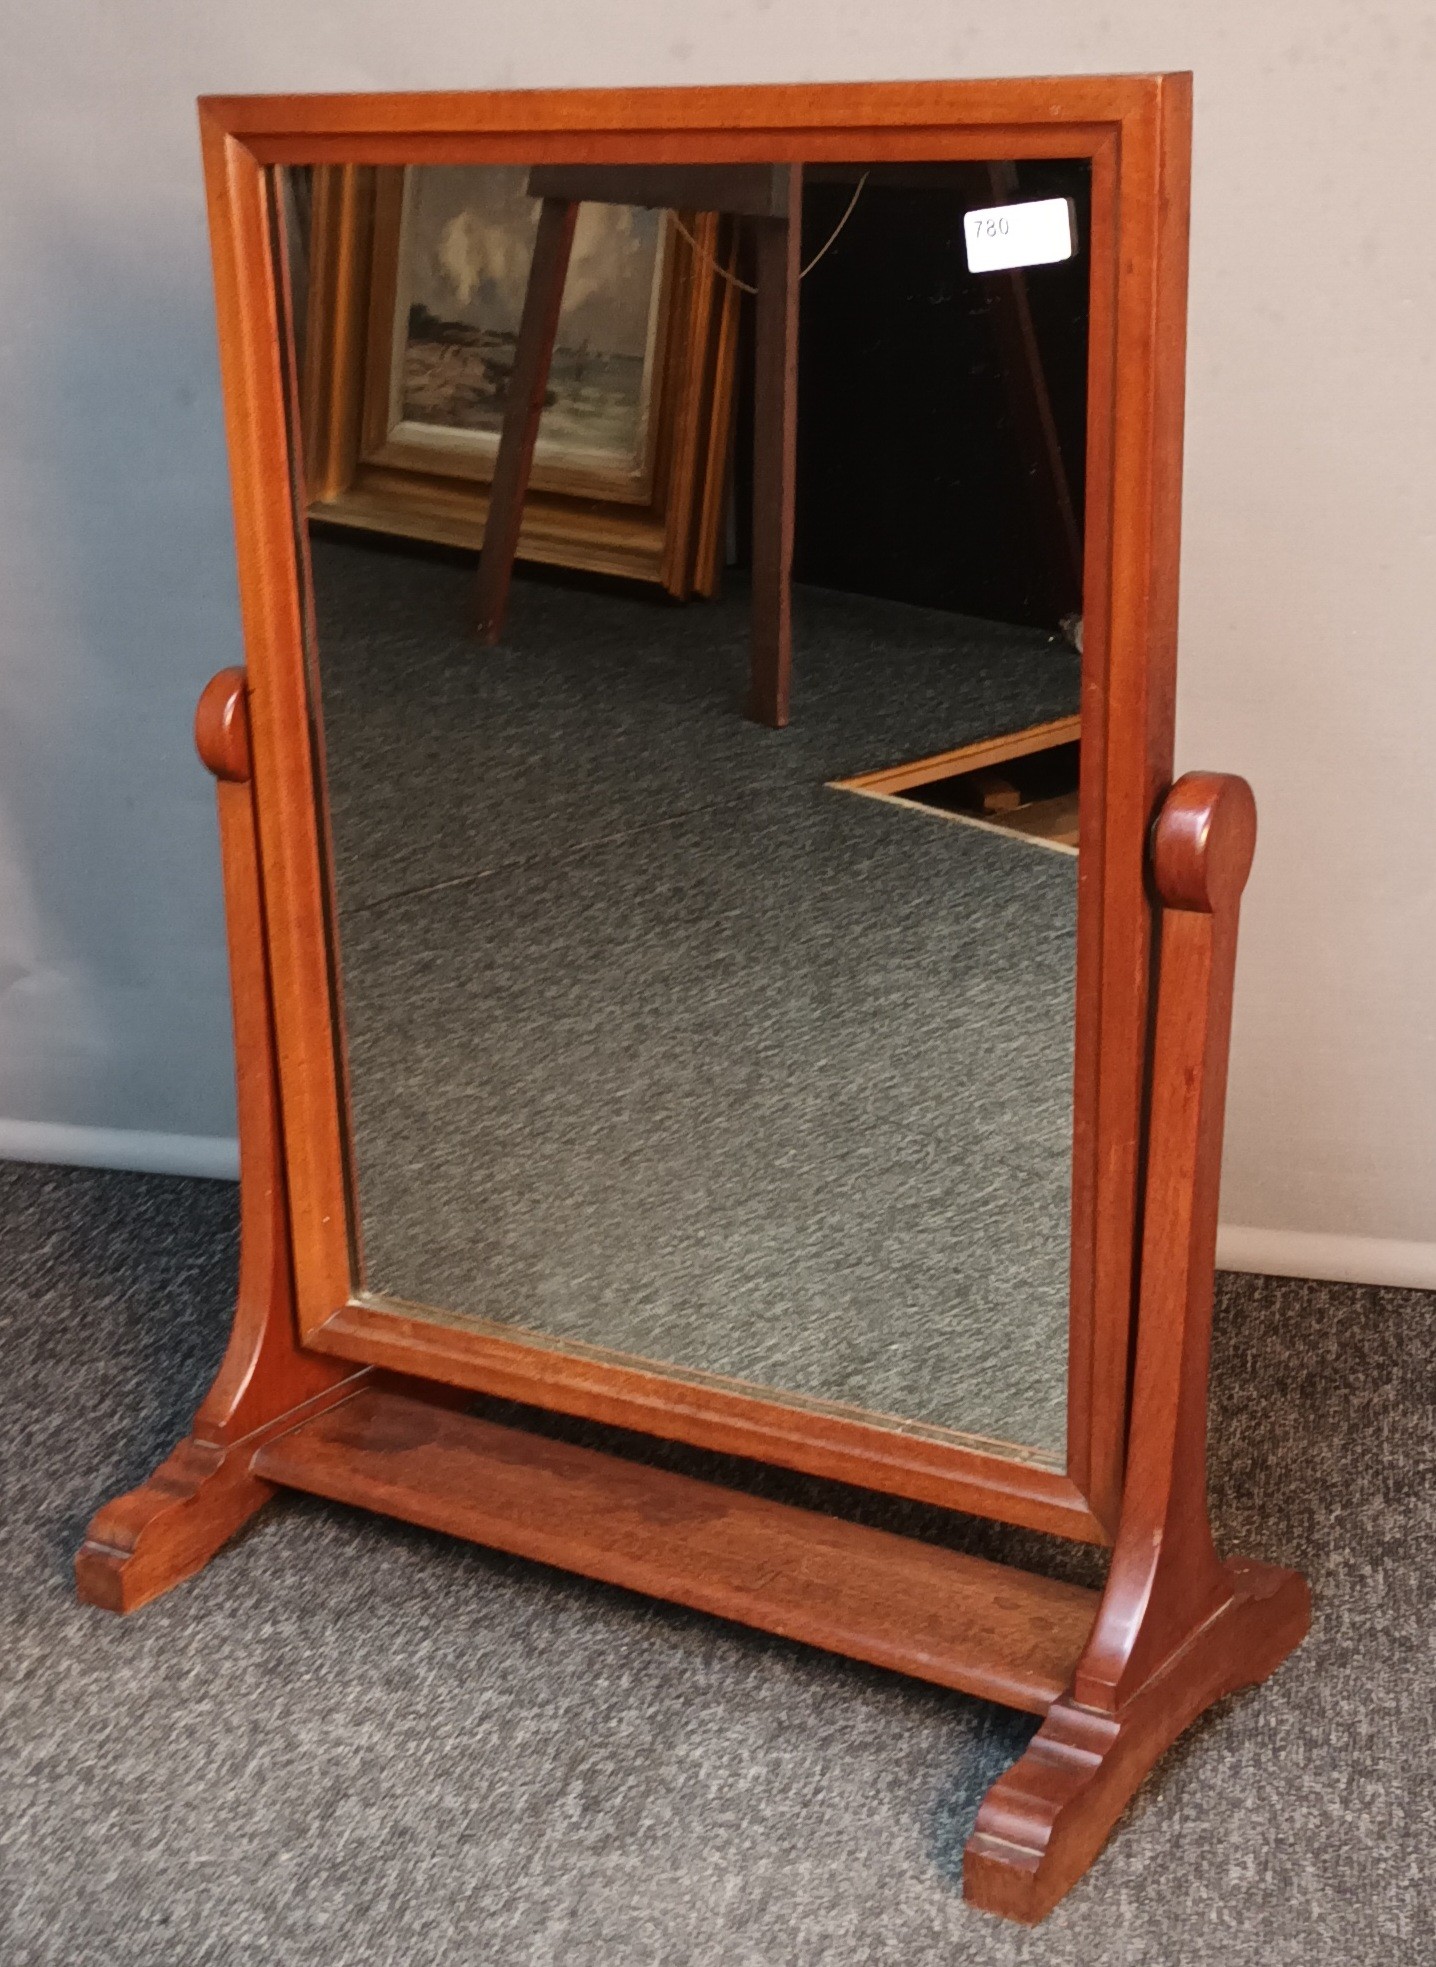 Antique style table top dressing mirror. [70x45cm]